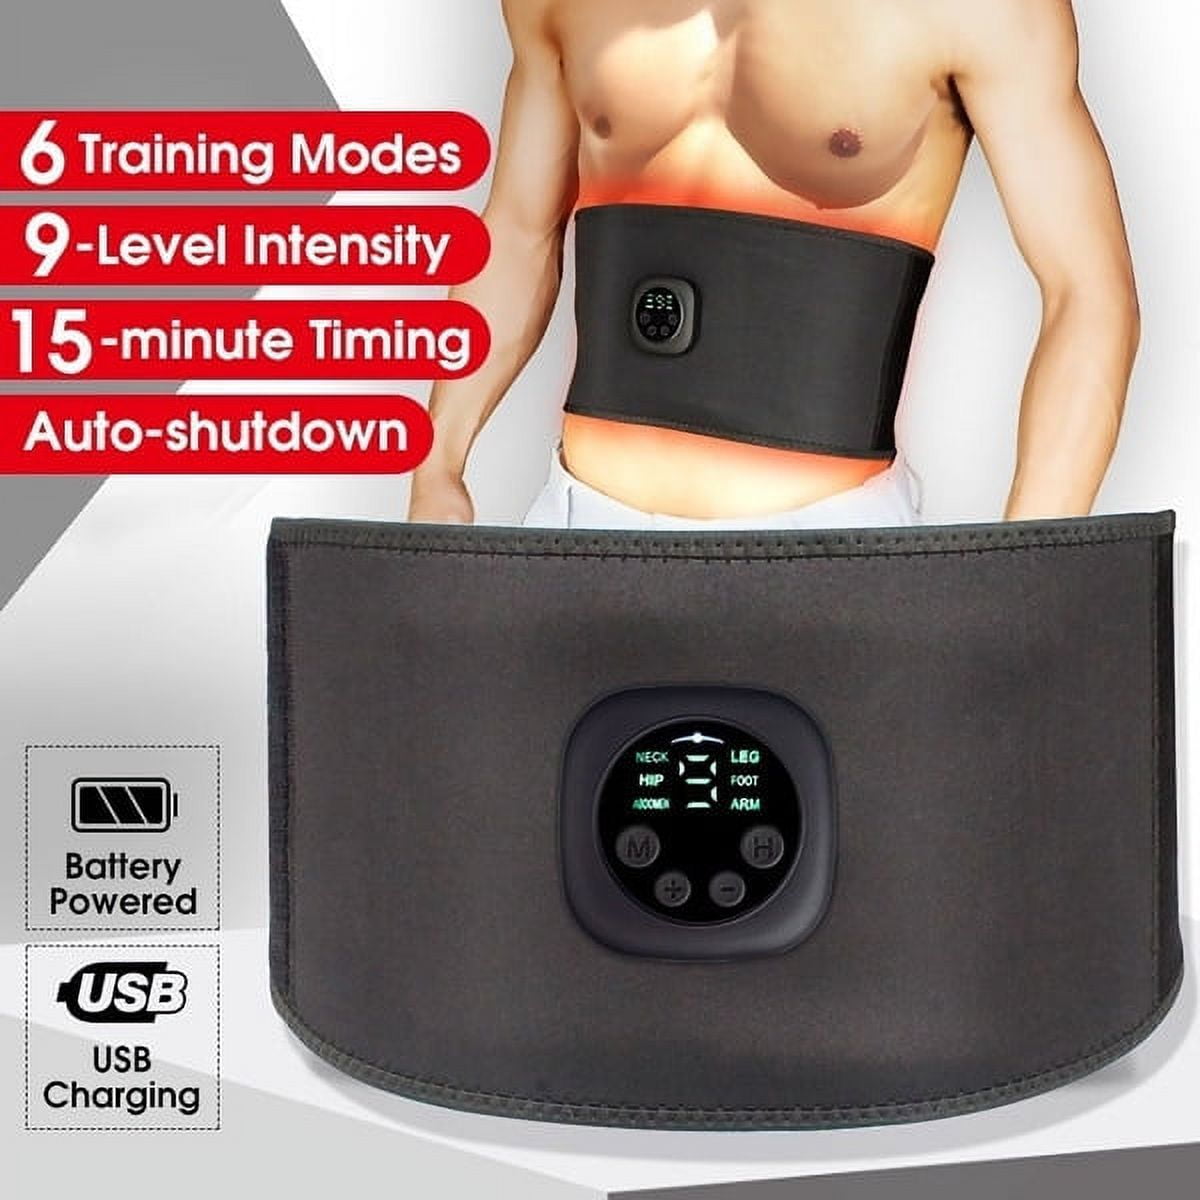 EMS Muscle Stimulator Abs Abdominal Trainer Toning Belt USB Recharge Body  Belly Weight Loss Home Gym